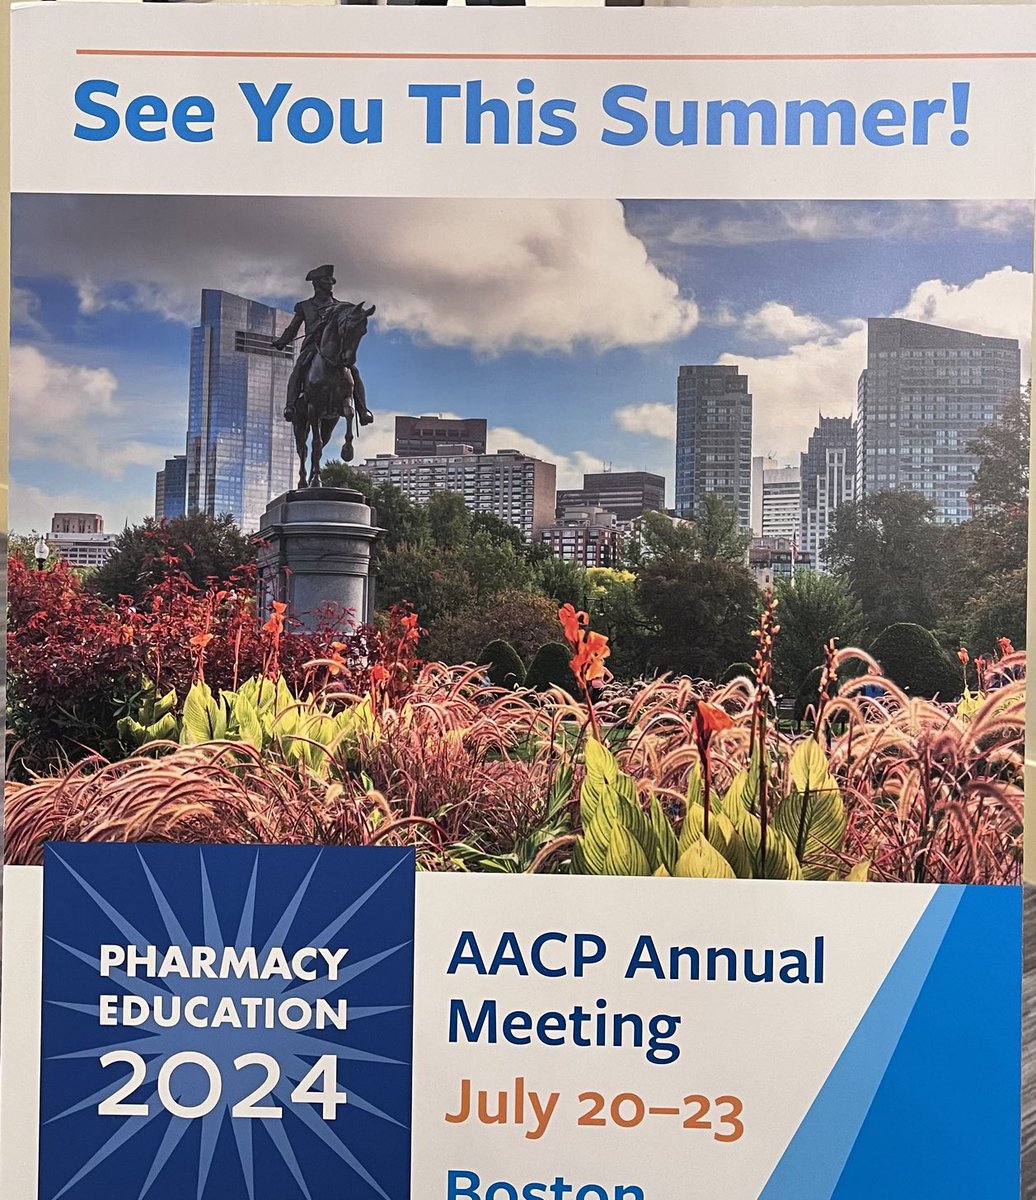 It was wonderful to engage with COD colleagues at #Interim24 ⁦@AACPharmacy programs and meetings. Very insightful sessions!⁩ 🤩 Join us in Boston for the Annual Meeting.😀